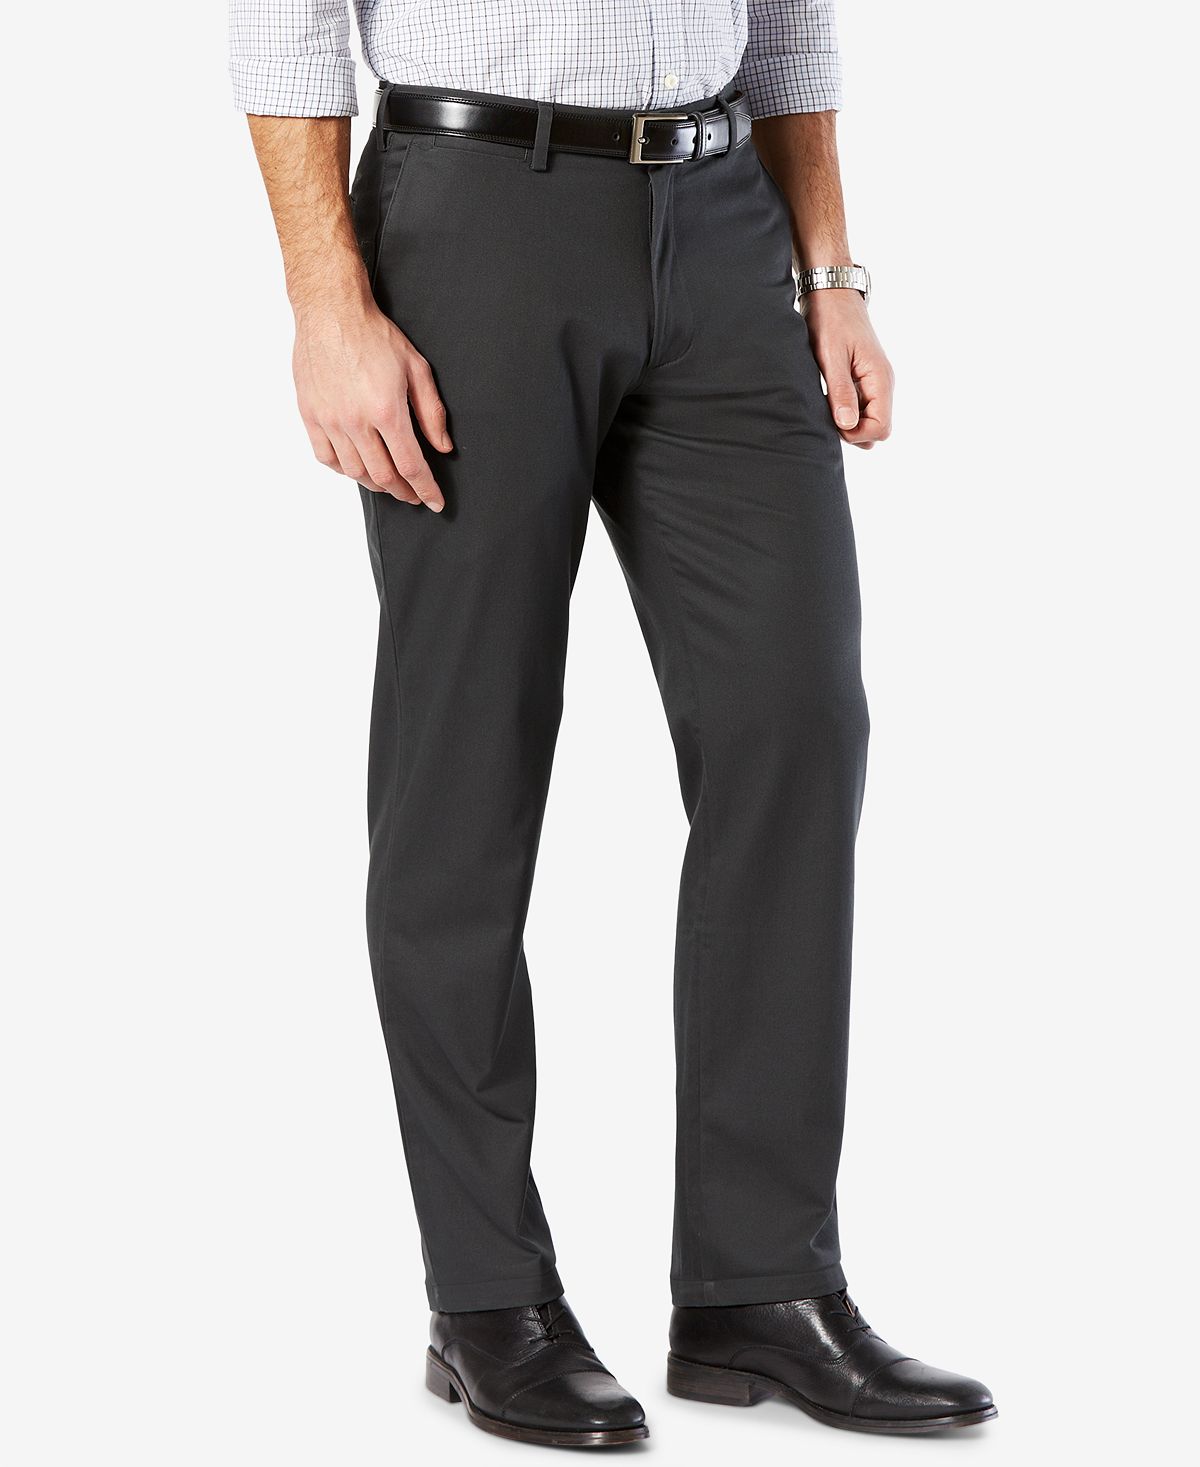 Dockers ' Signature Lux Cotton Straight Fit Stretch Khaki Pants Charcoal Heather